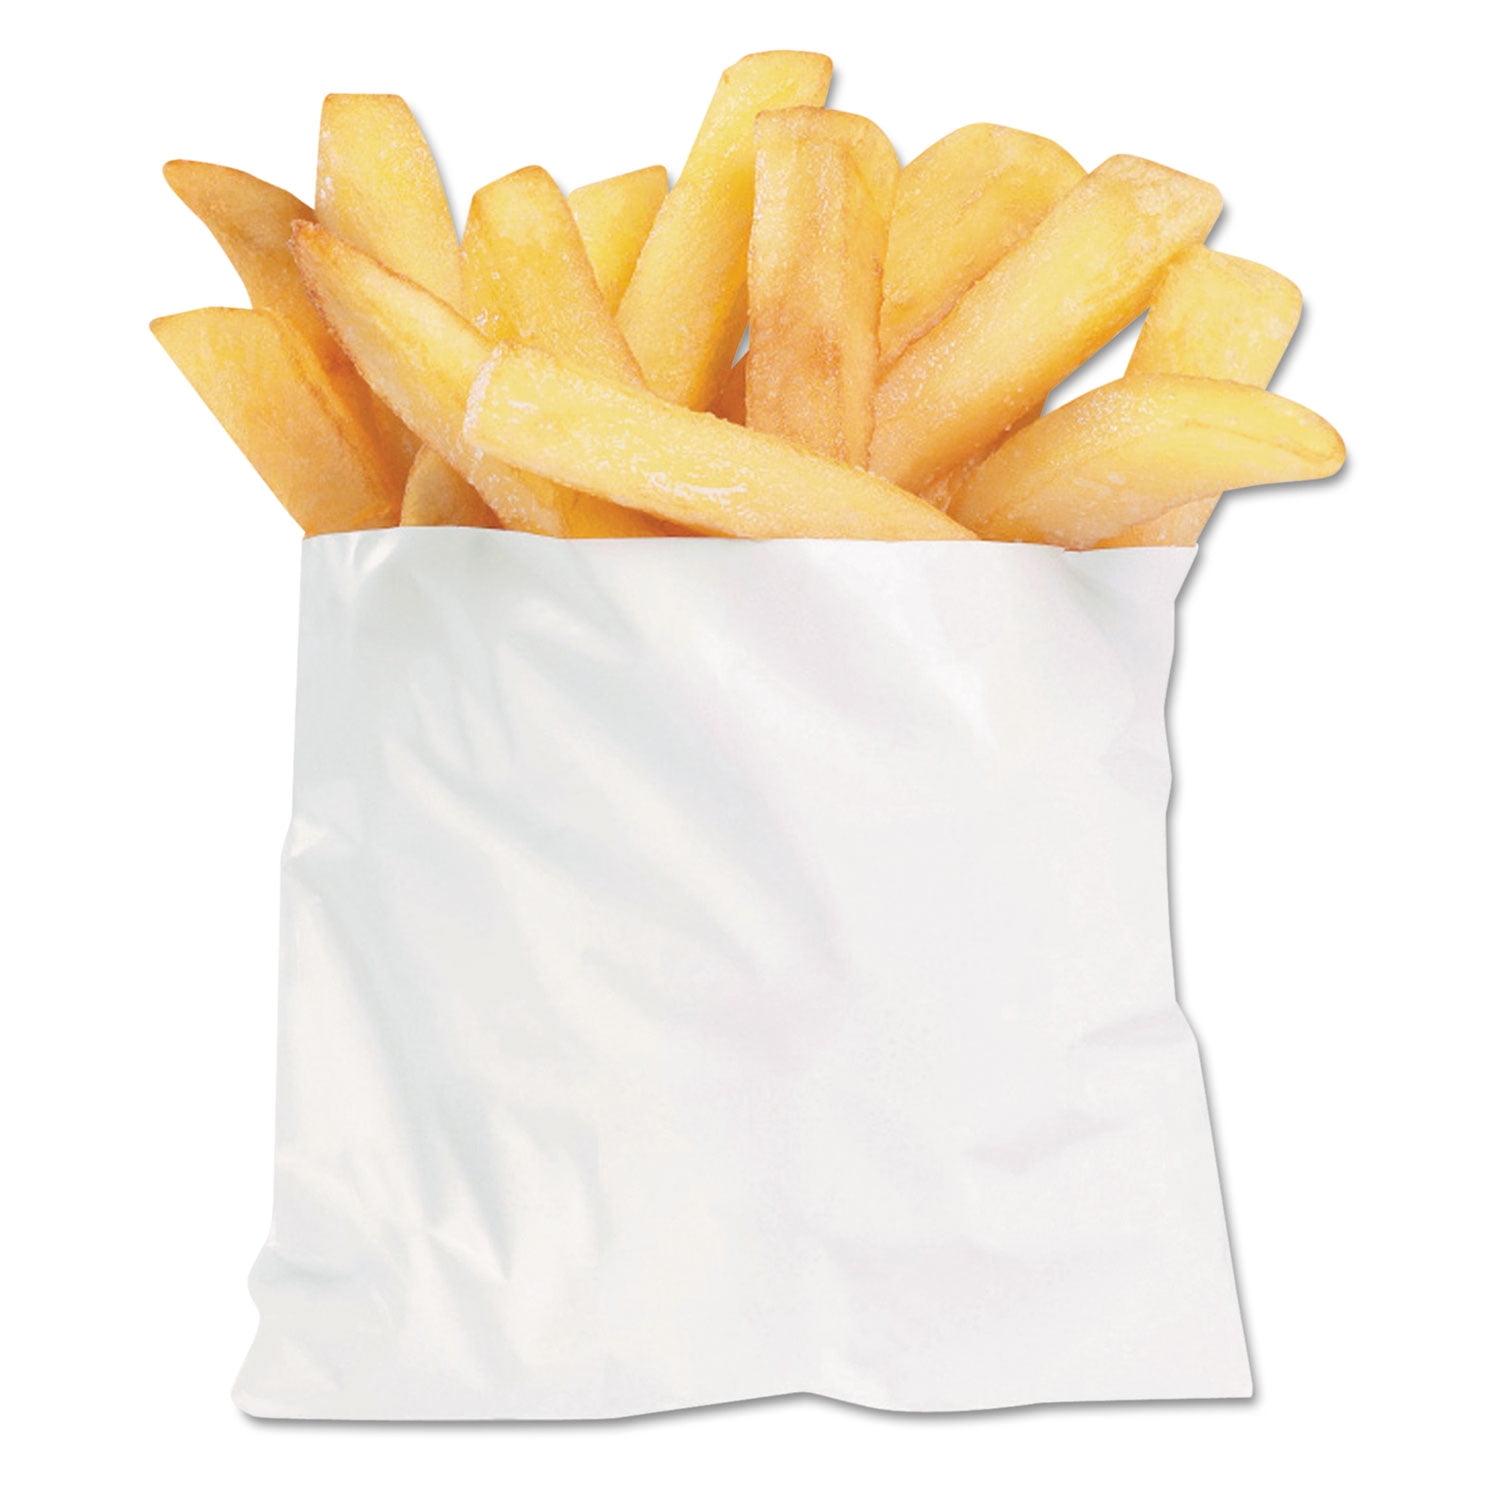 MT Products Kraft French Fry Bags - 4.5 x 4.5 Disposable Grease-Resistant  Small Paper Bags Great f…See more MT Products Kraft French Fry Bags - 4.5